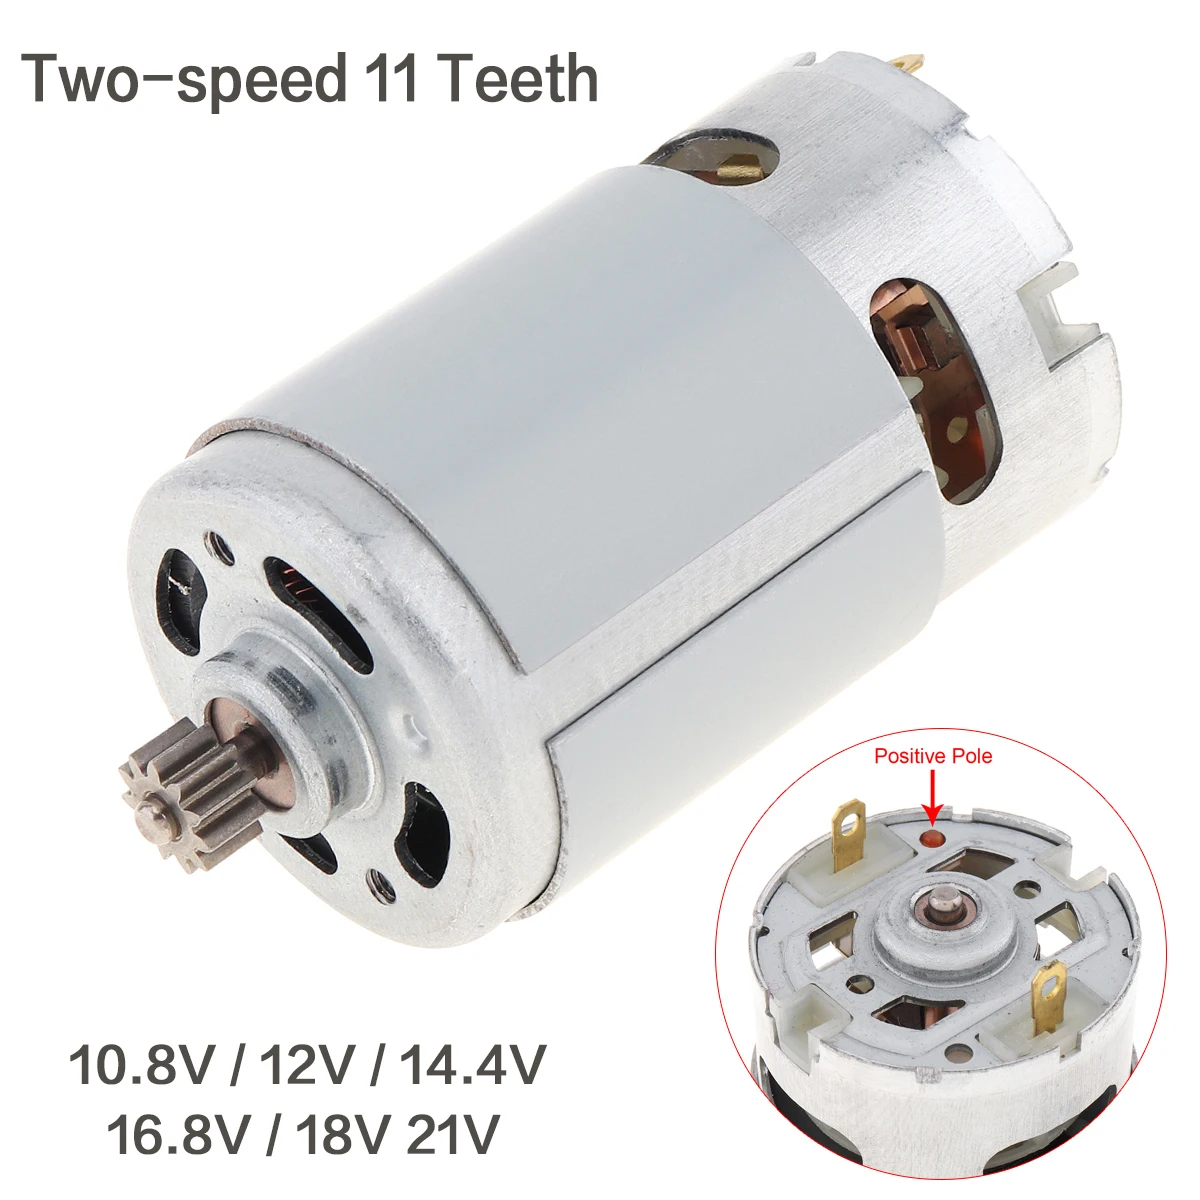 RS550 18V DC Motor w/ Two-speed 11 Teeth for Cordless Charge Drill Screwdriver 